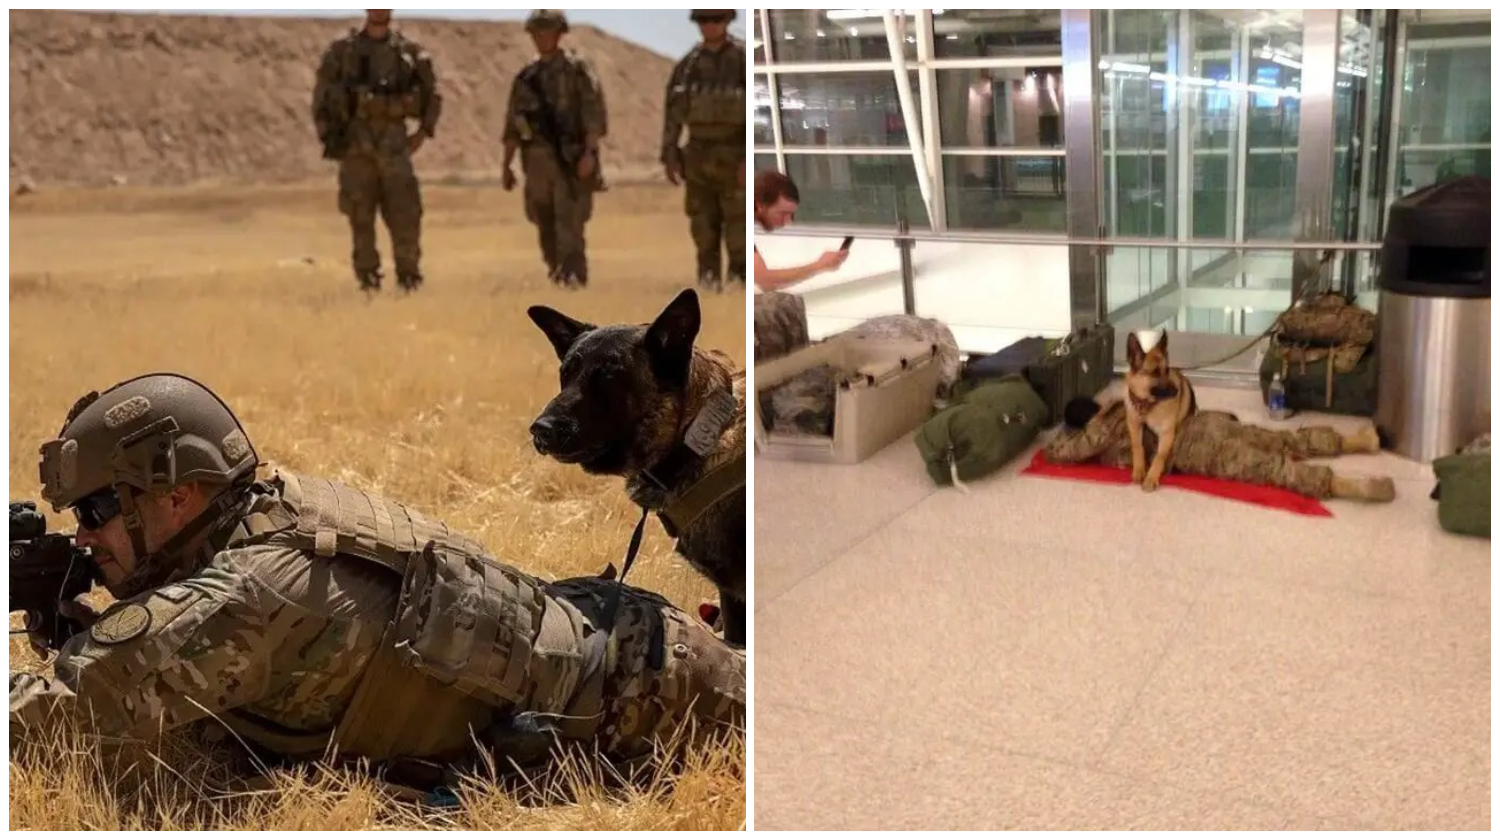 At the Airport, a Loyal Military Dog Watches over a Sleeping Soldier to Ensure His Safety